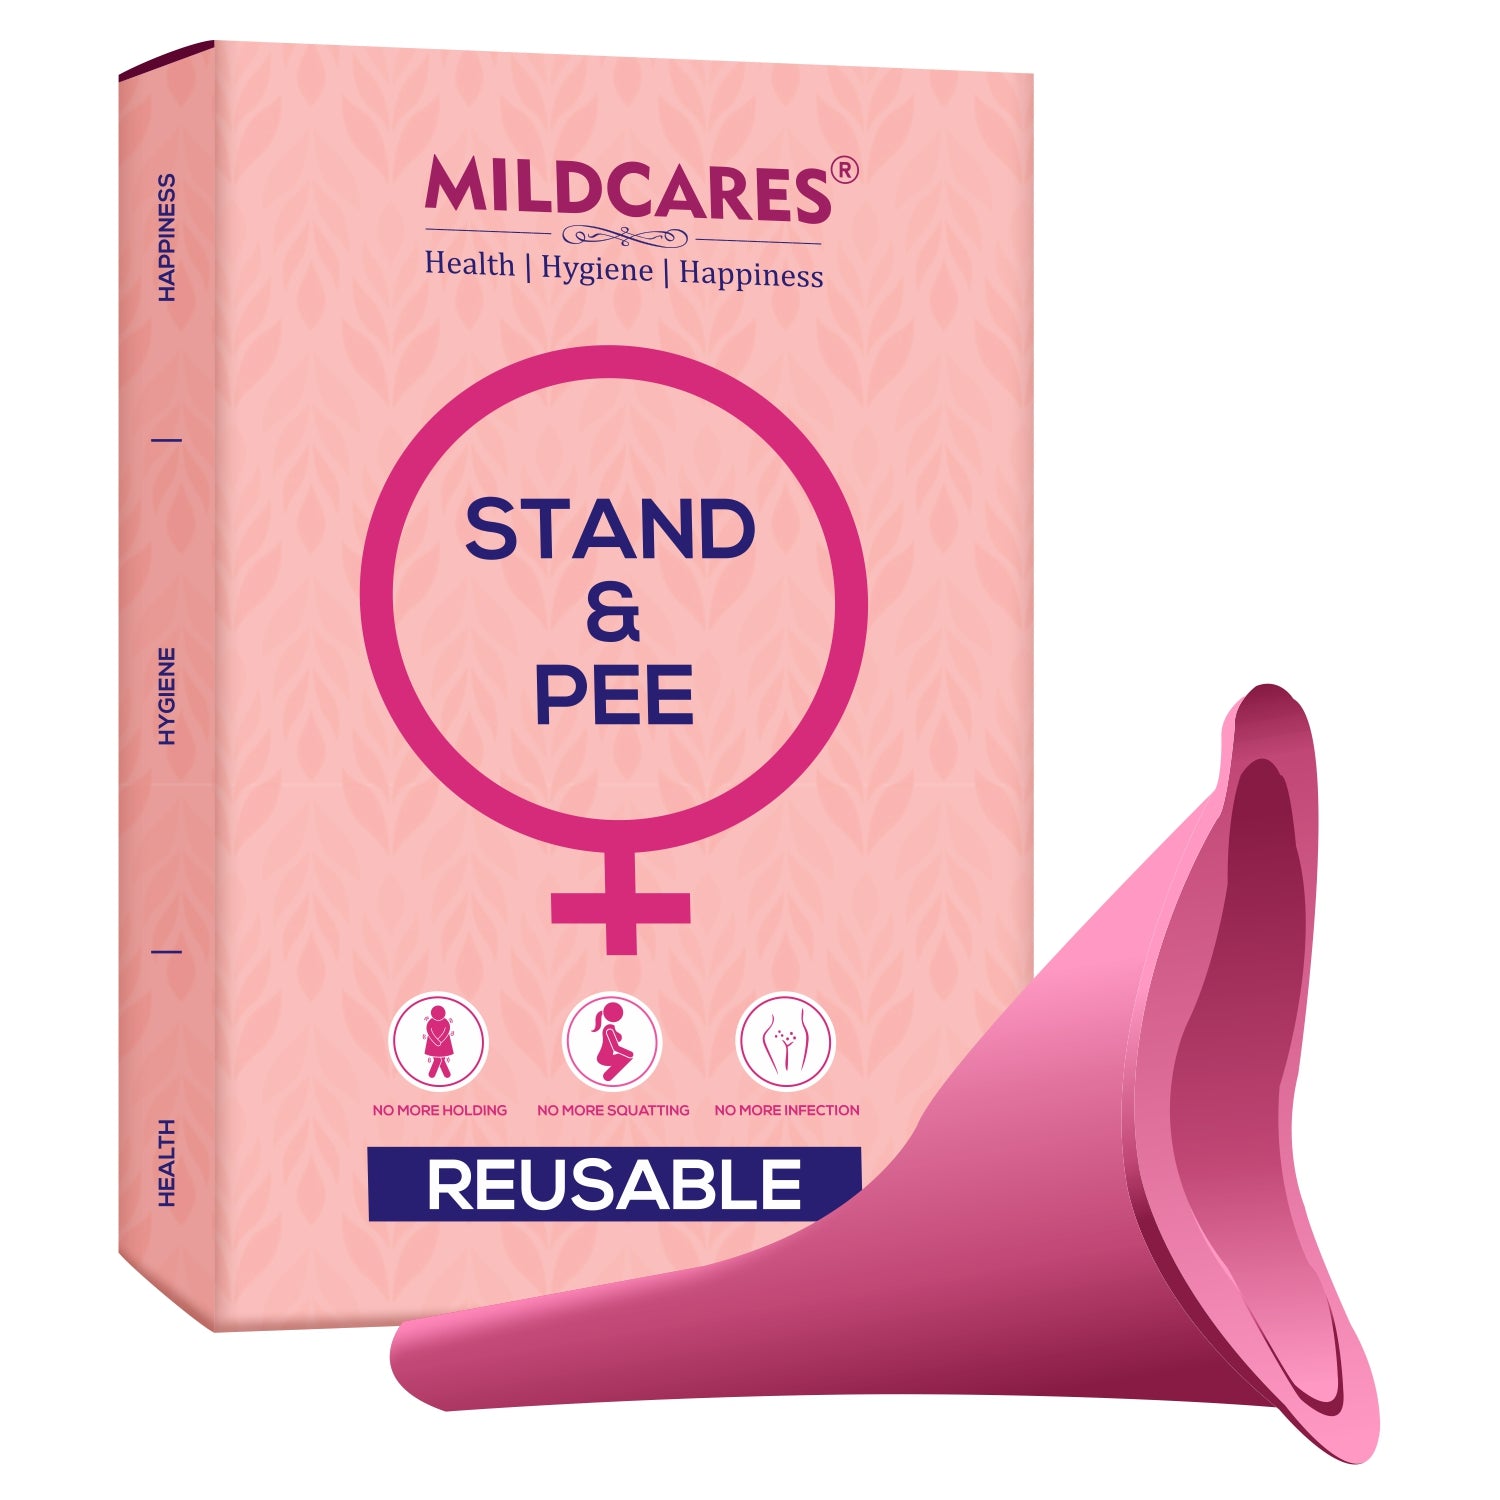 Mildcares Reusable Stand and Pee Female Urination Device Pink ( Pack of 1 ) Reusable Female Urination Device